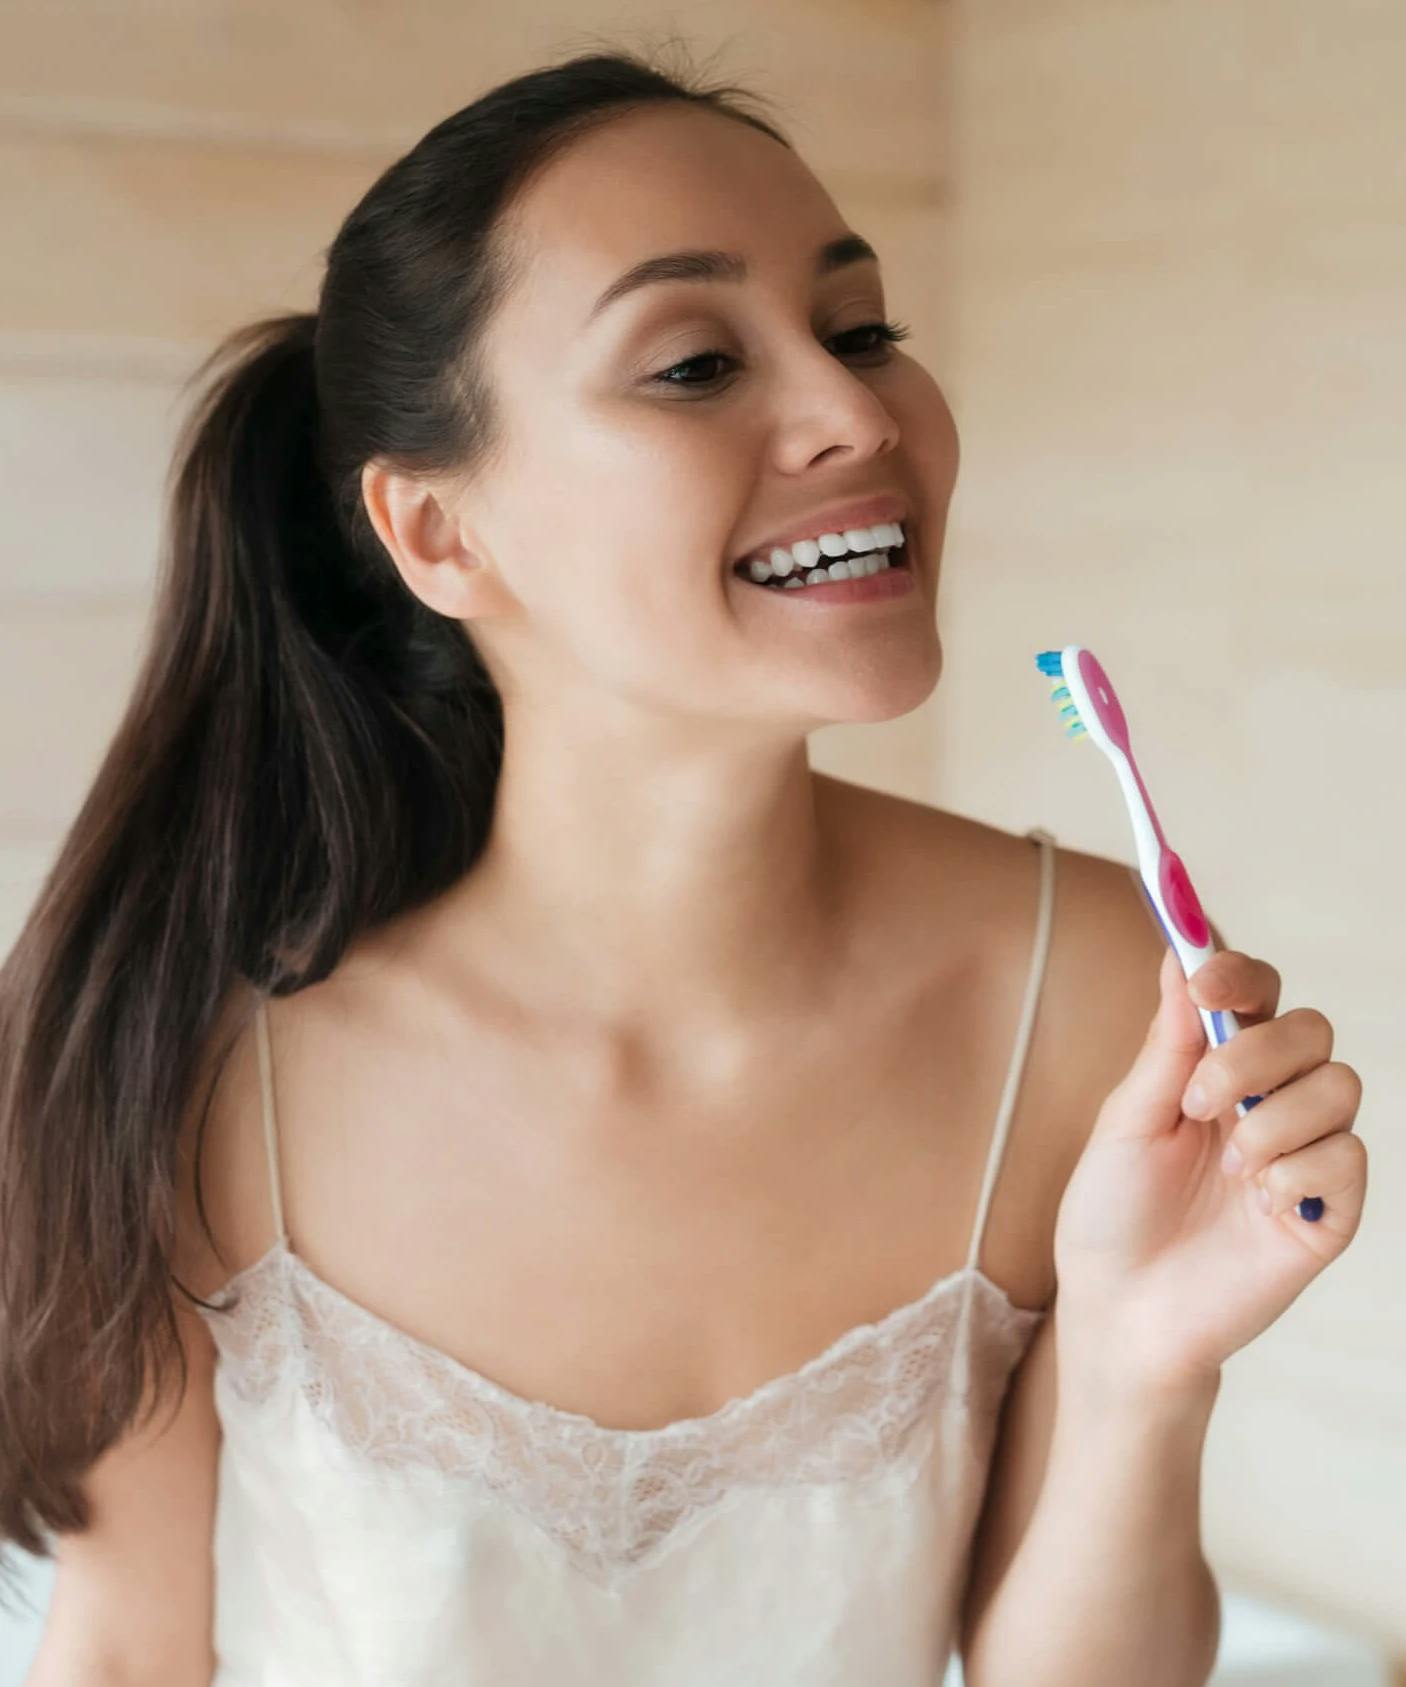 This Non-Toxic Toothpaste Trend Is Replacing Fluoride